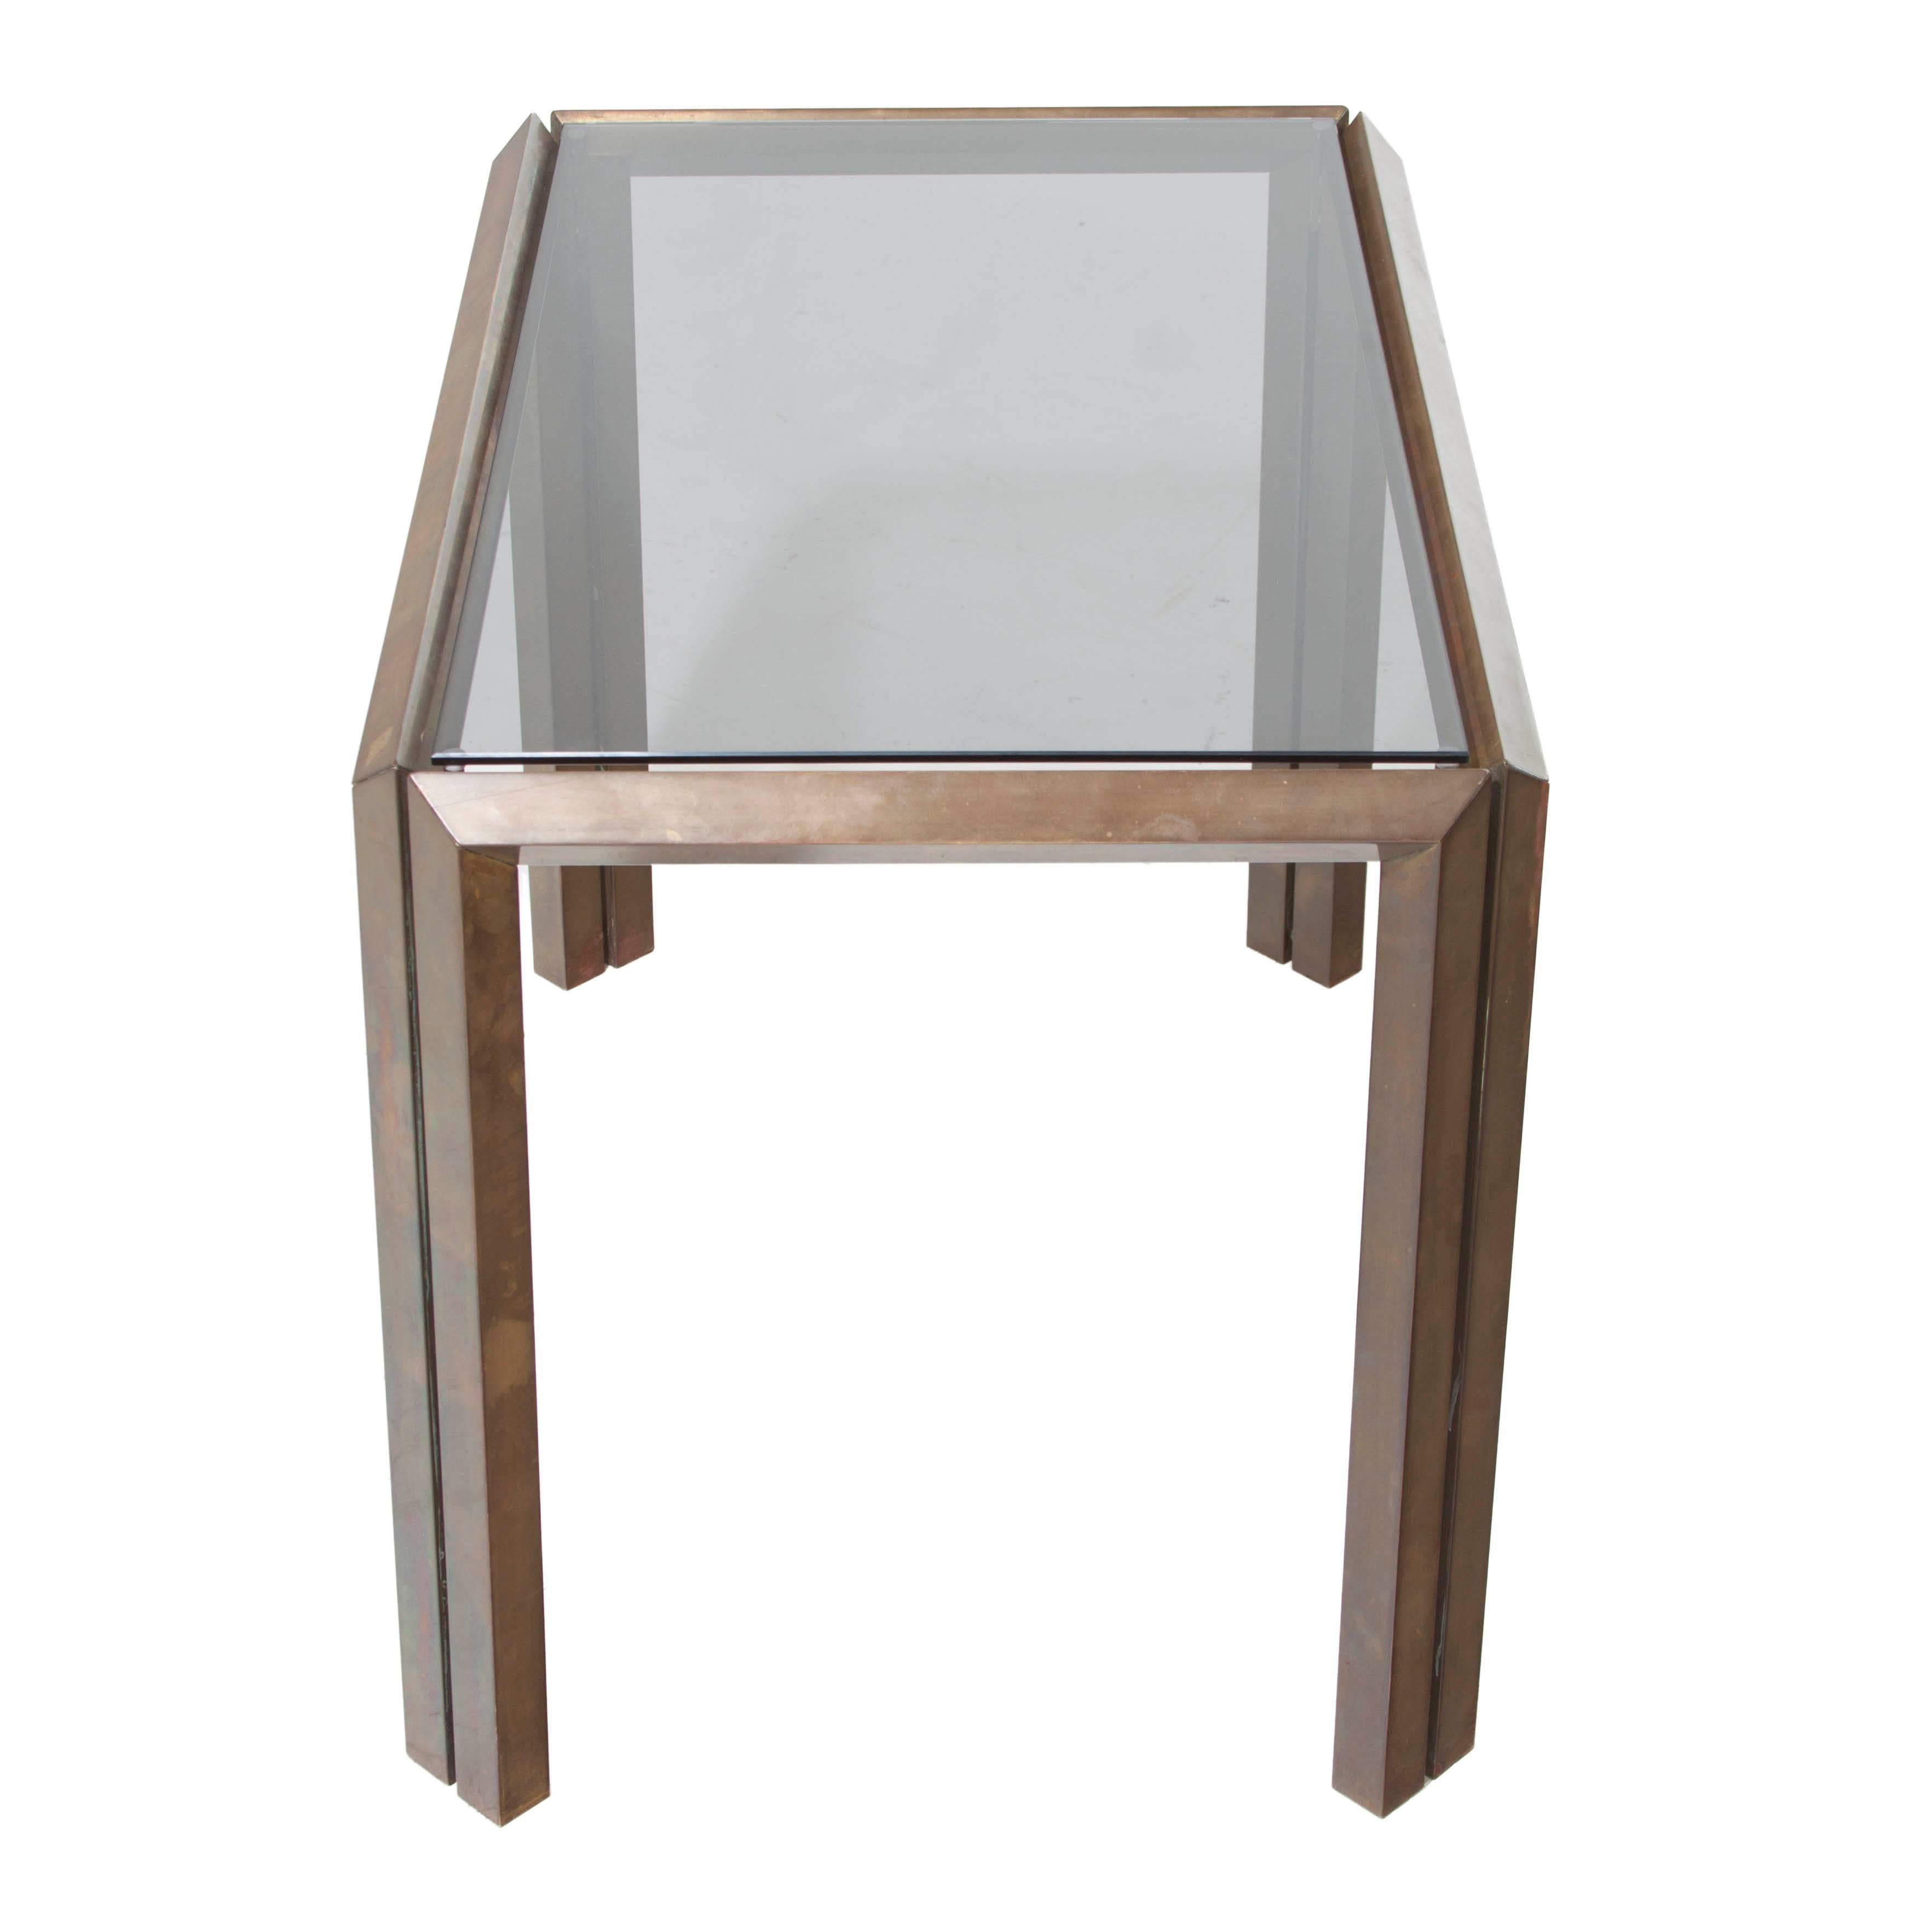 Unique bronze side table with smokey grey glass top. Polished to retain beautiful Mid-Century patina.